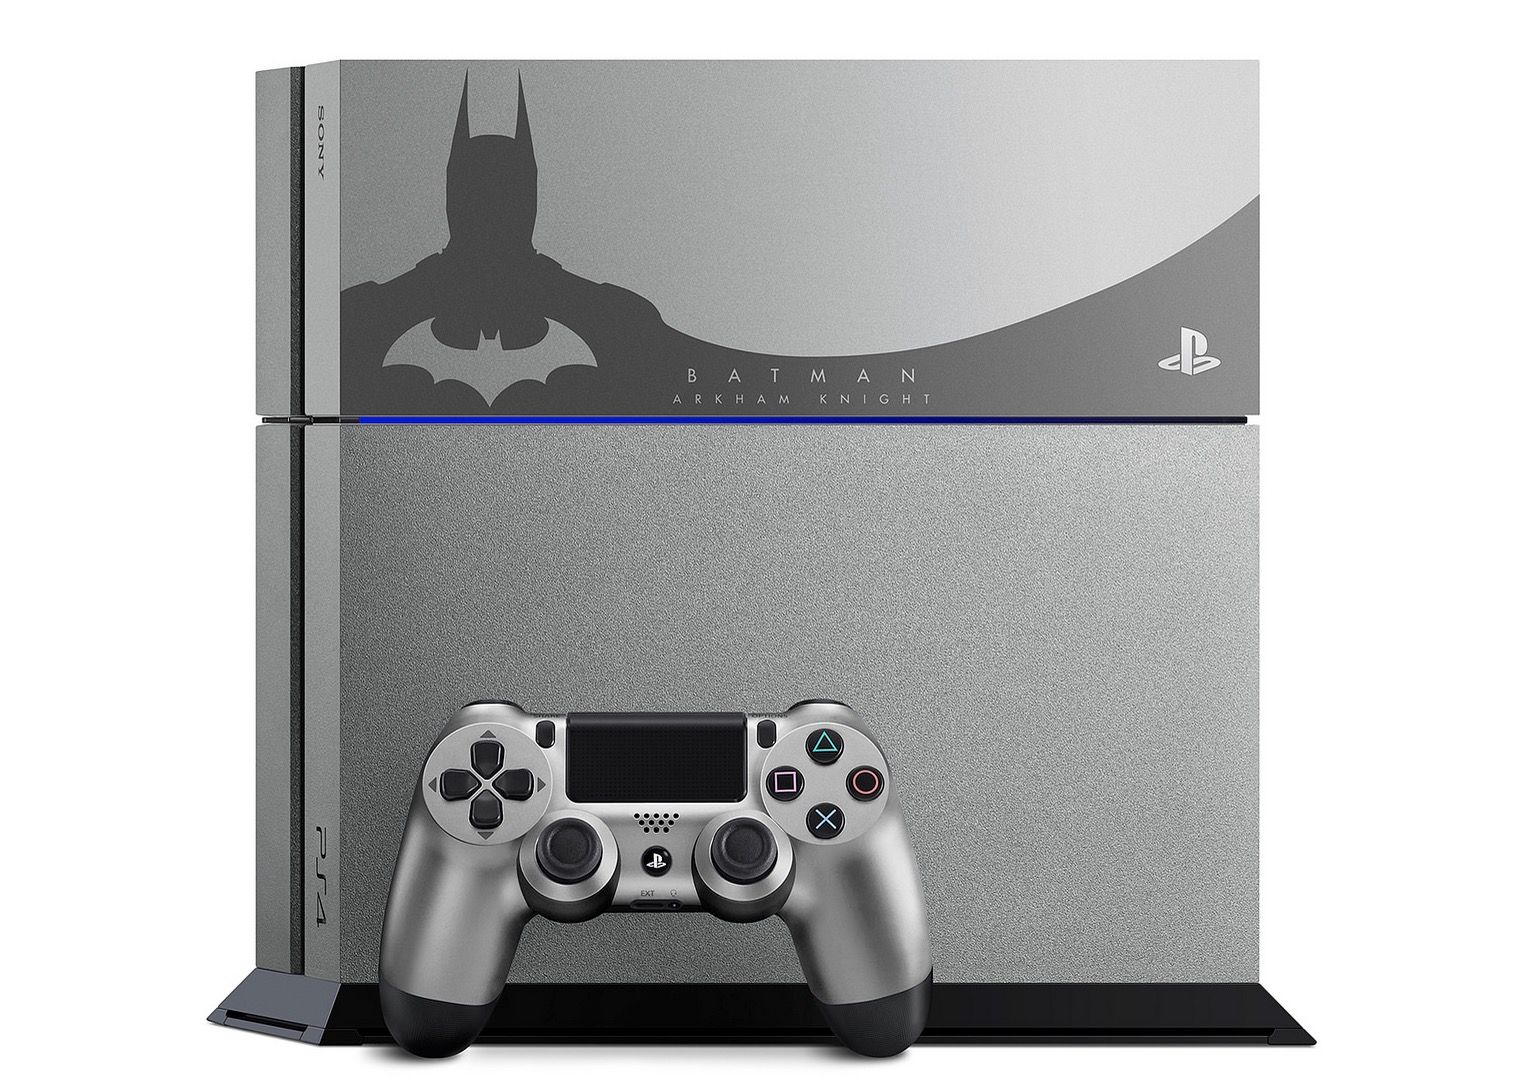 Sony unveils Batman: Arkham Knight limited-edition PS4 and more